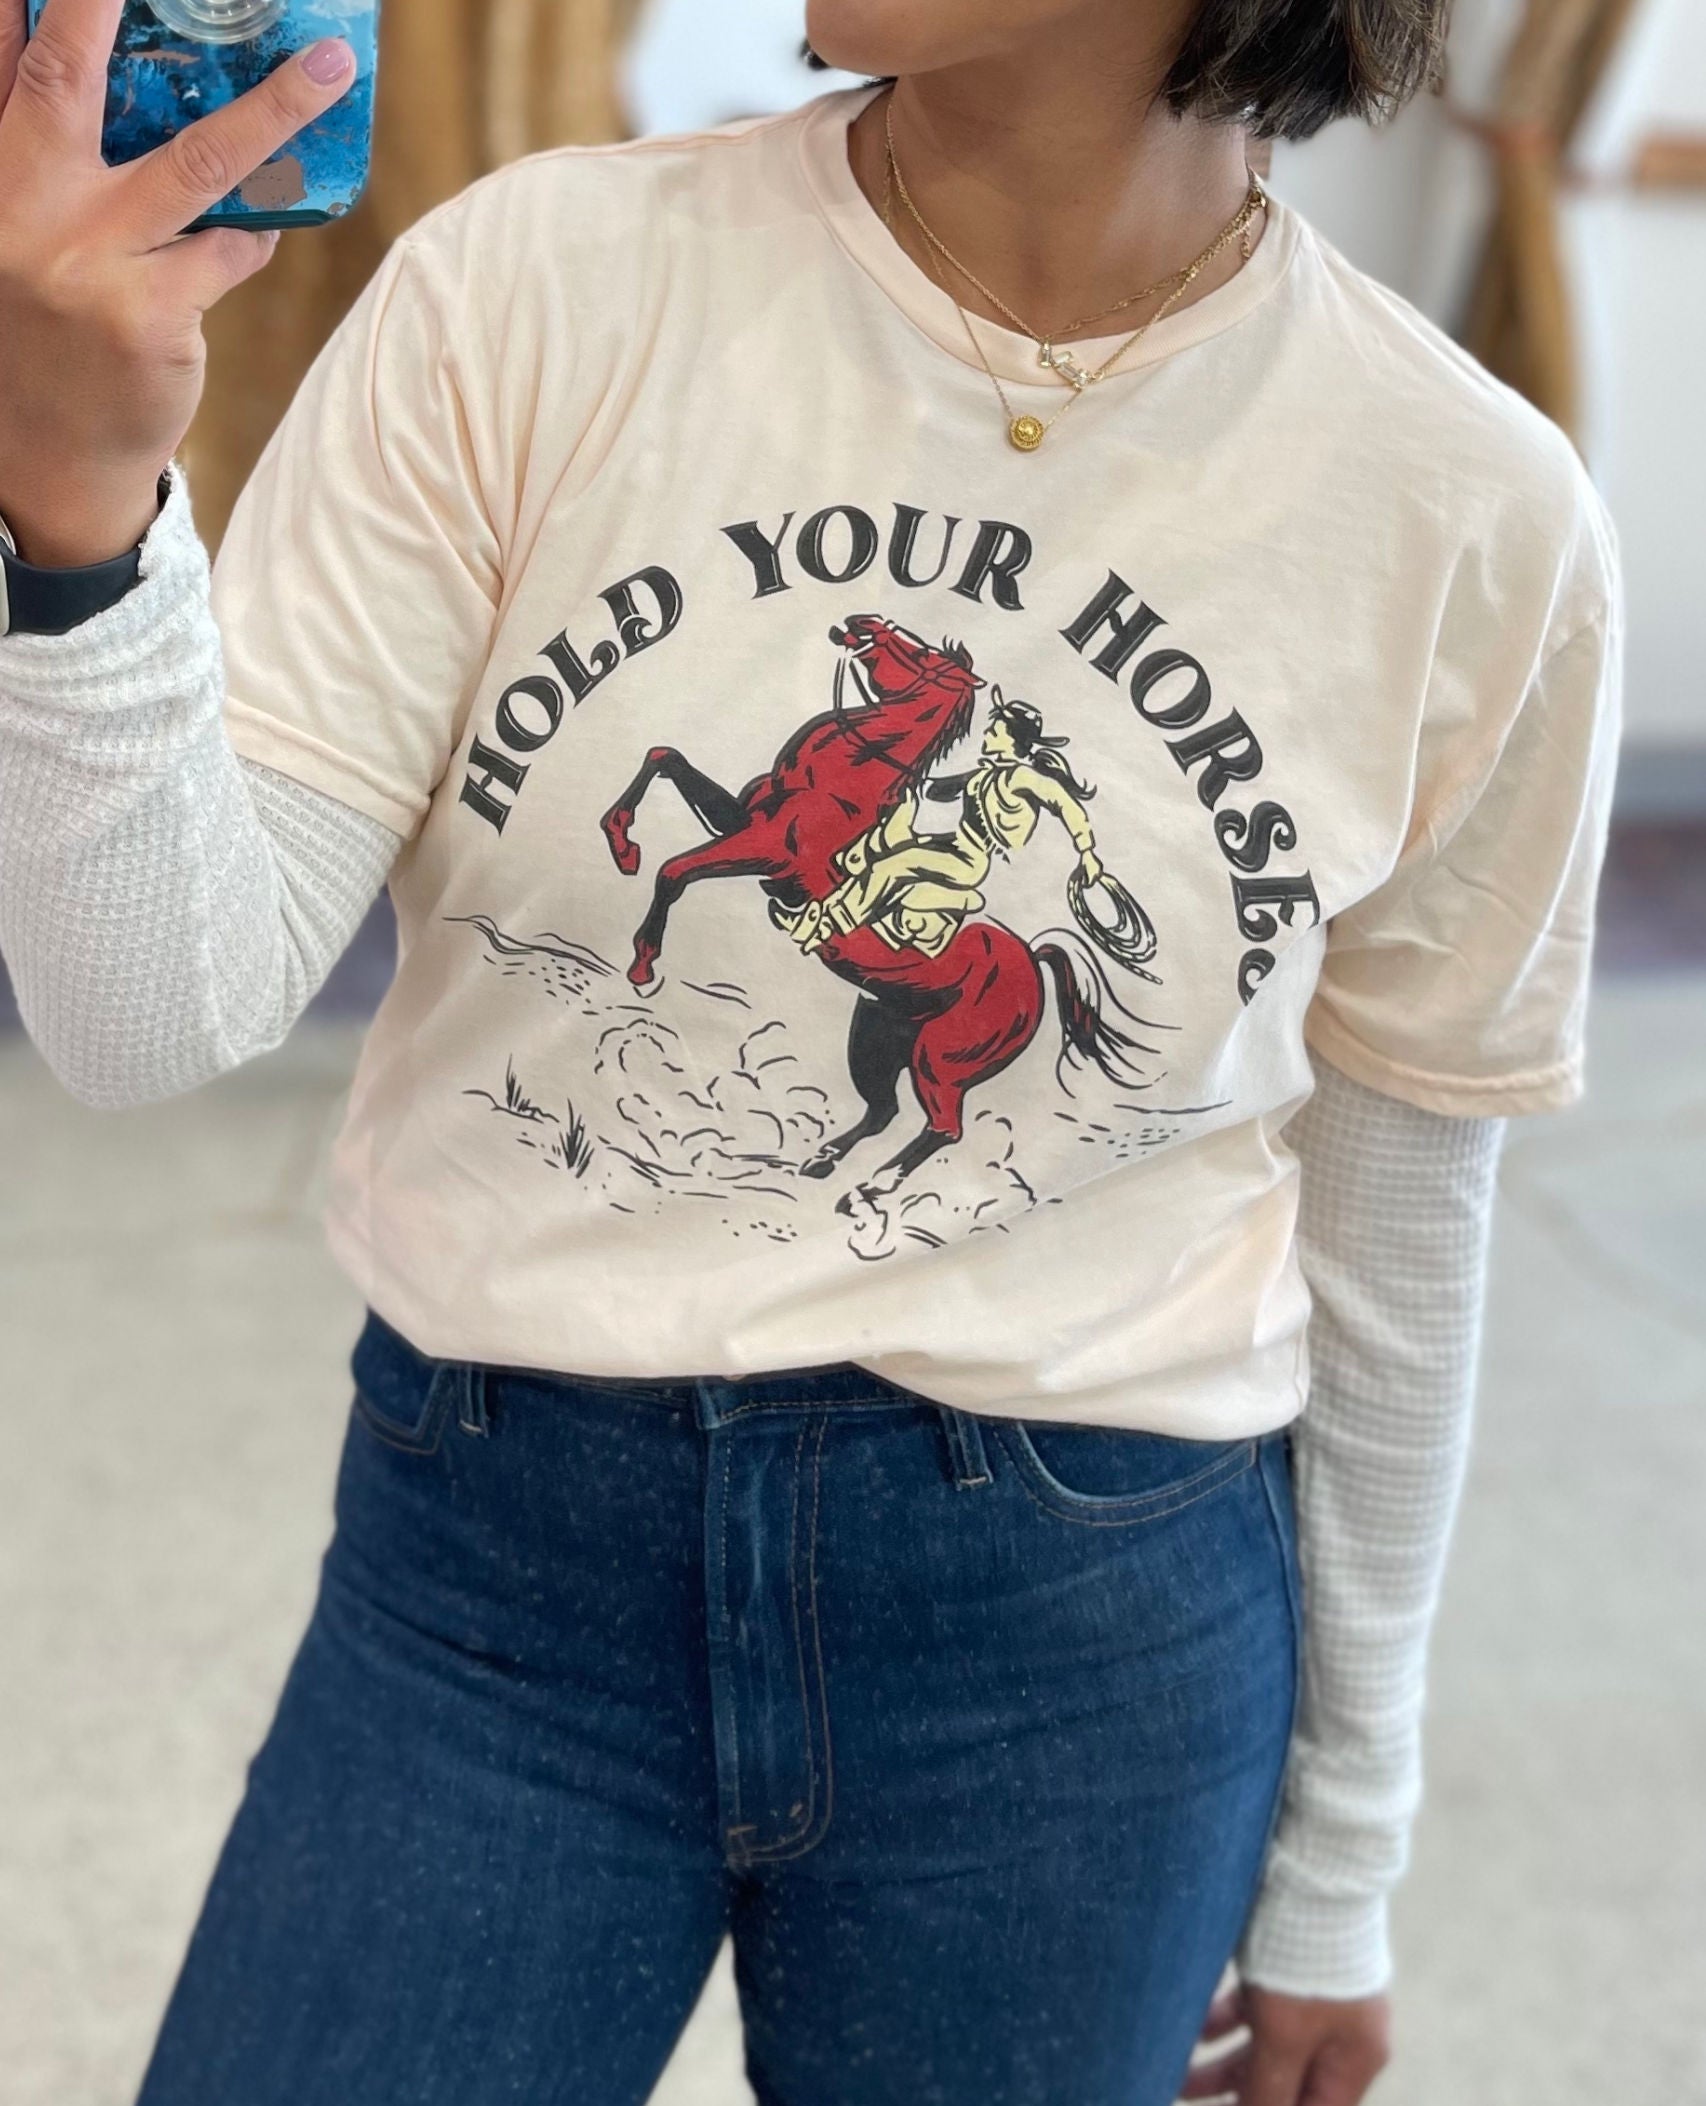 Hold Your Horses Vintage Unisex Tee